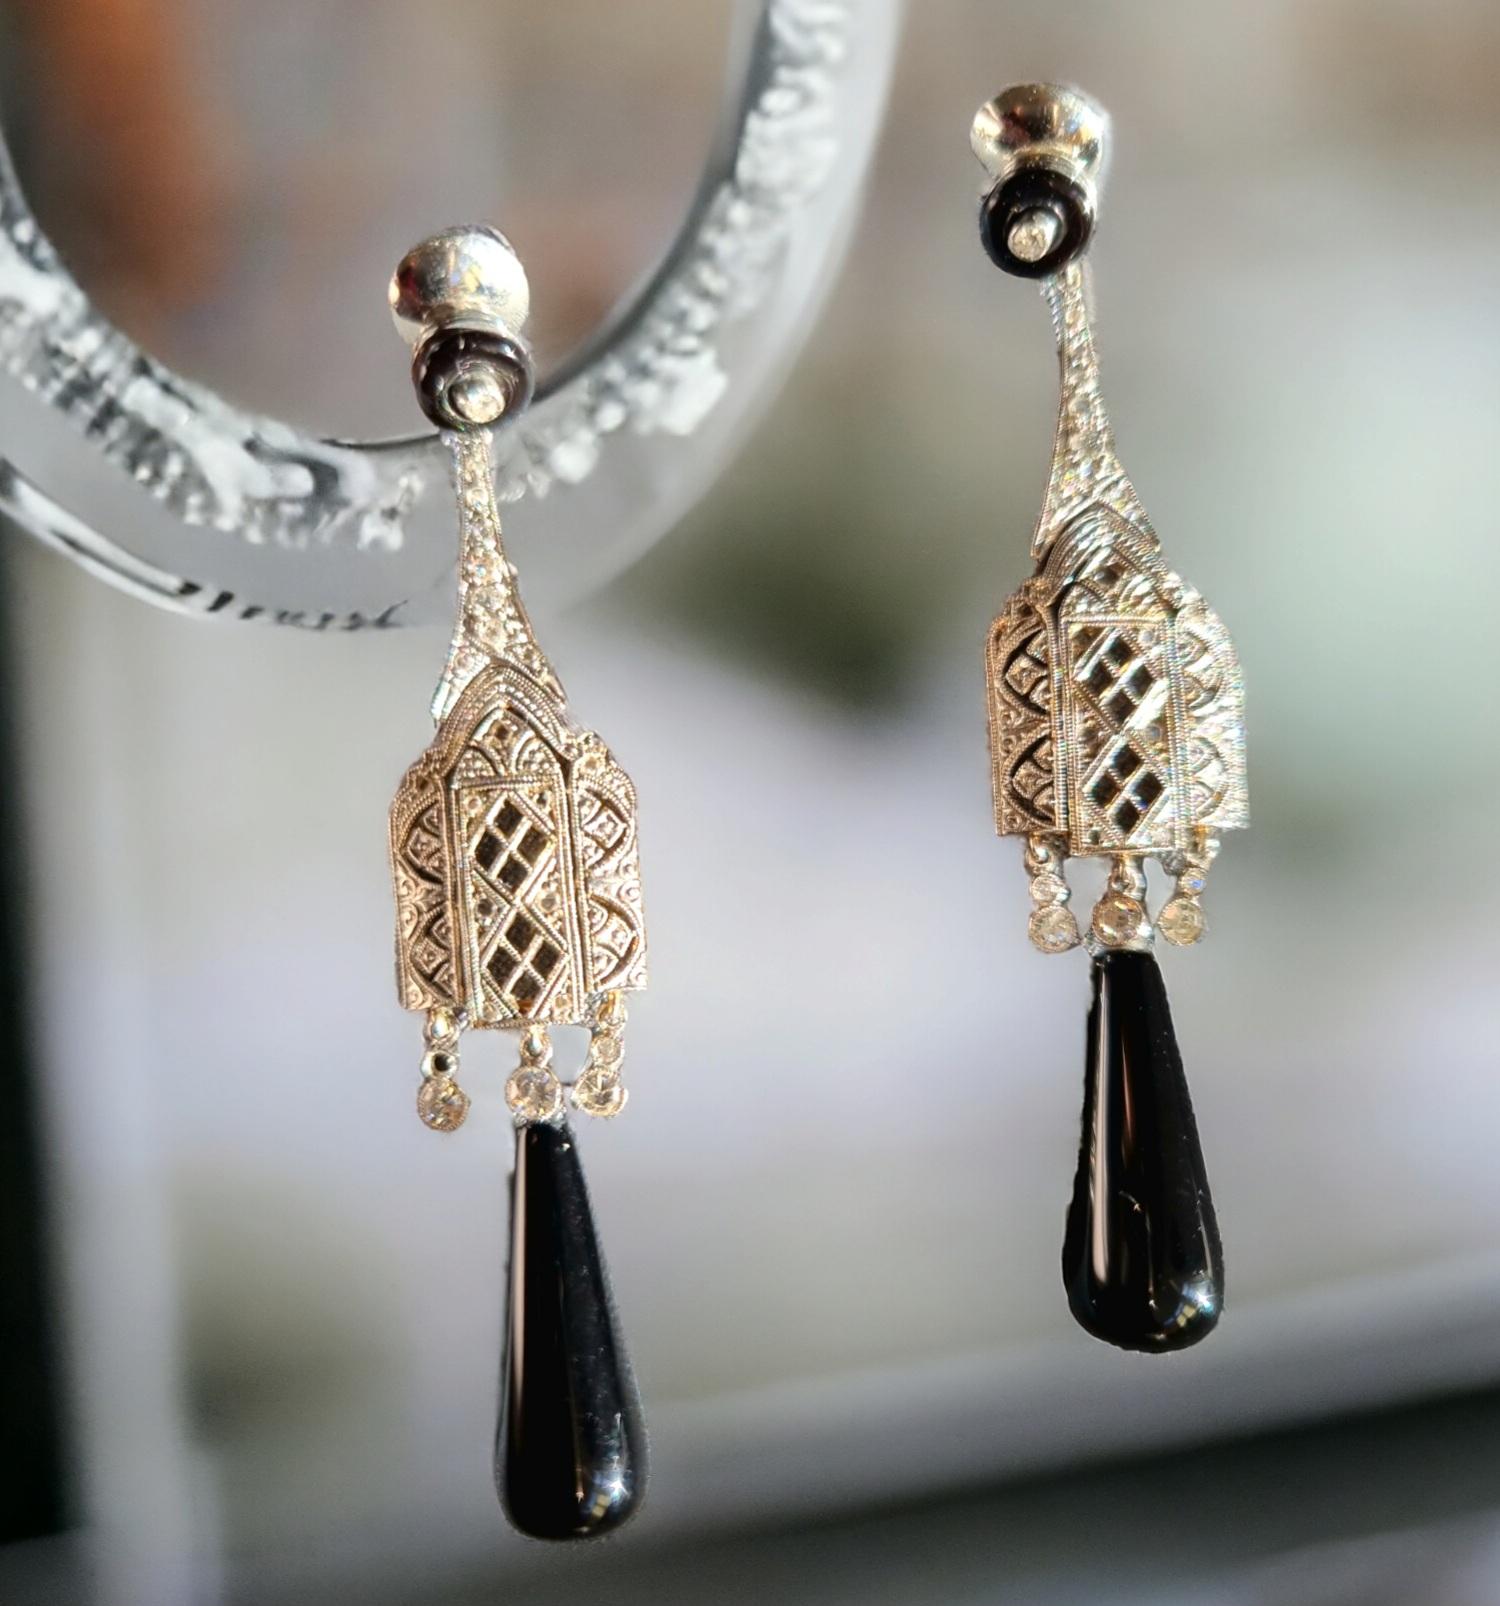 Onyx and Diamond Pendant Earrings
A pair of Onyx and Diamond Earrings. Art-Deco style. Mounted in platinum with delicate filigree and mille-grain craftmanship.
Length: 6.5cm; width: 1.5cm.
Unmarked, tested as Platinum.
Total weight: 14.05 grams.
We